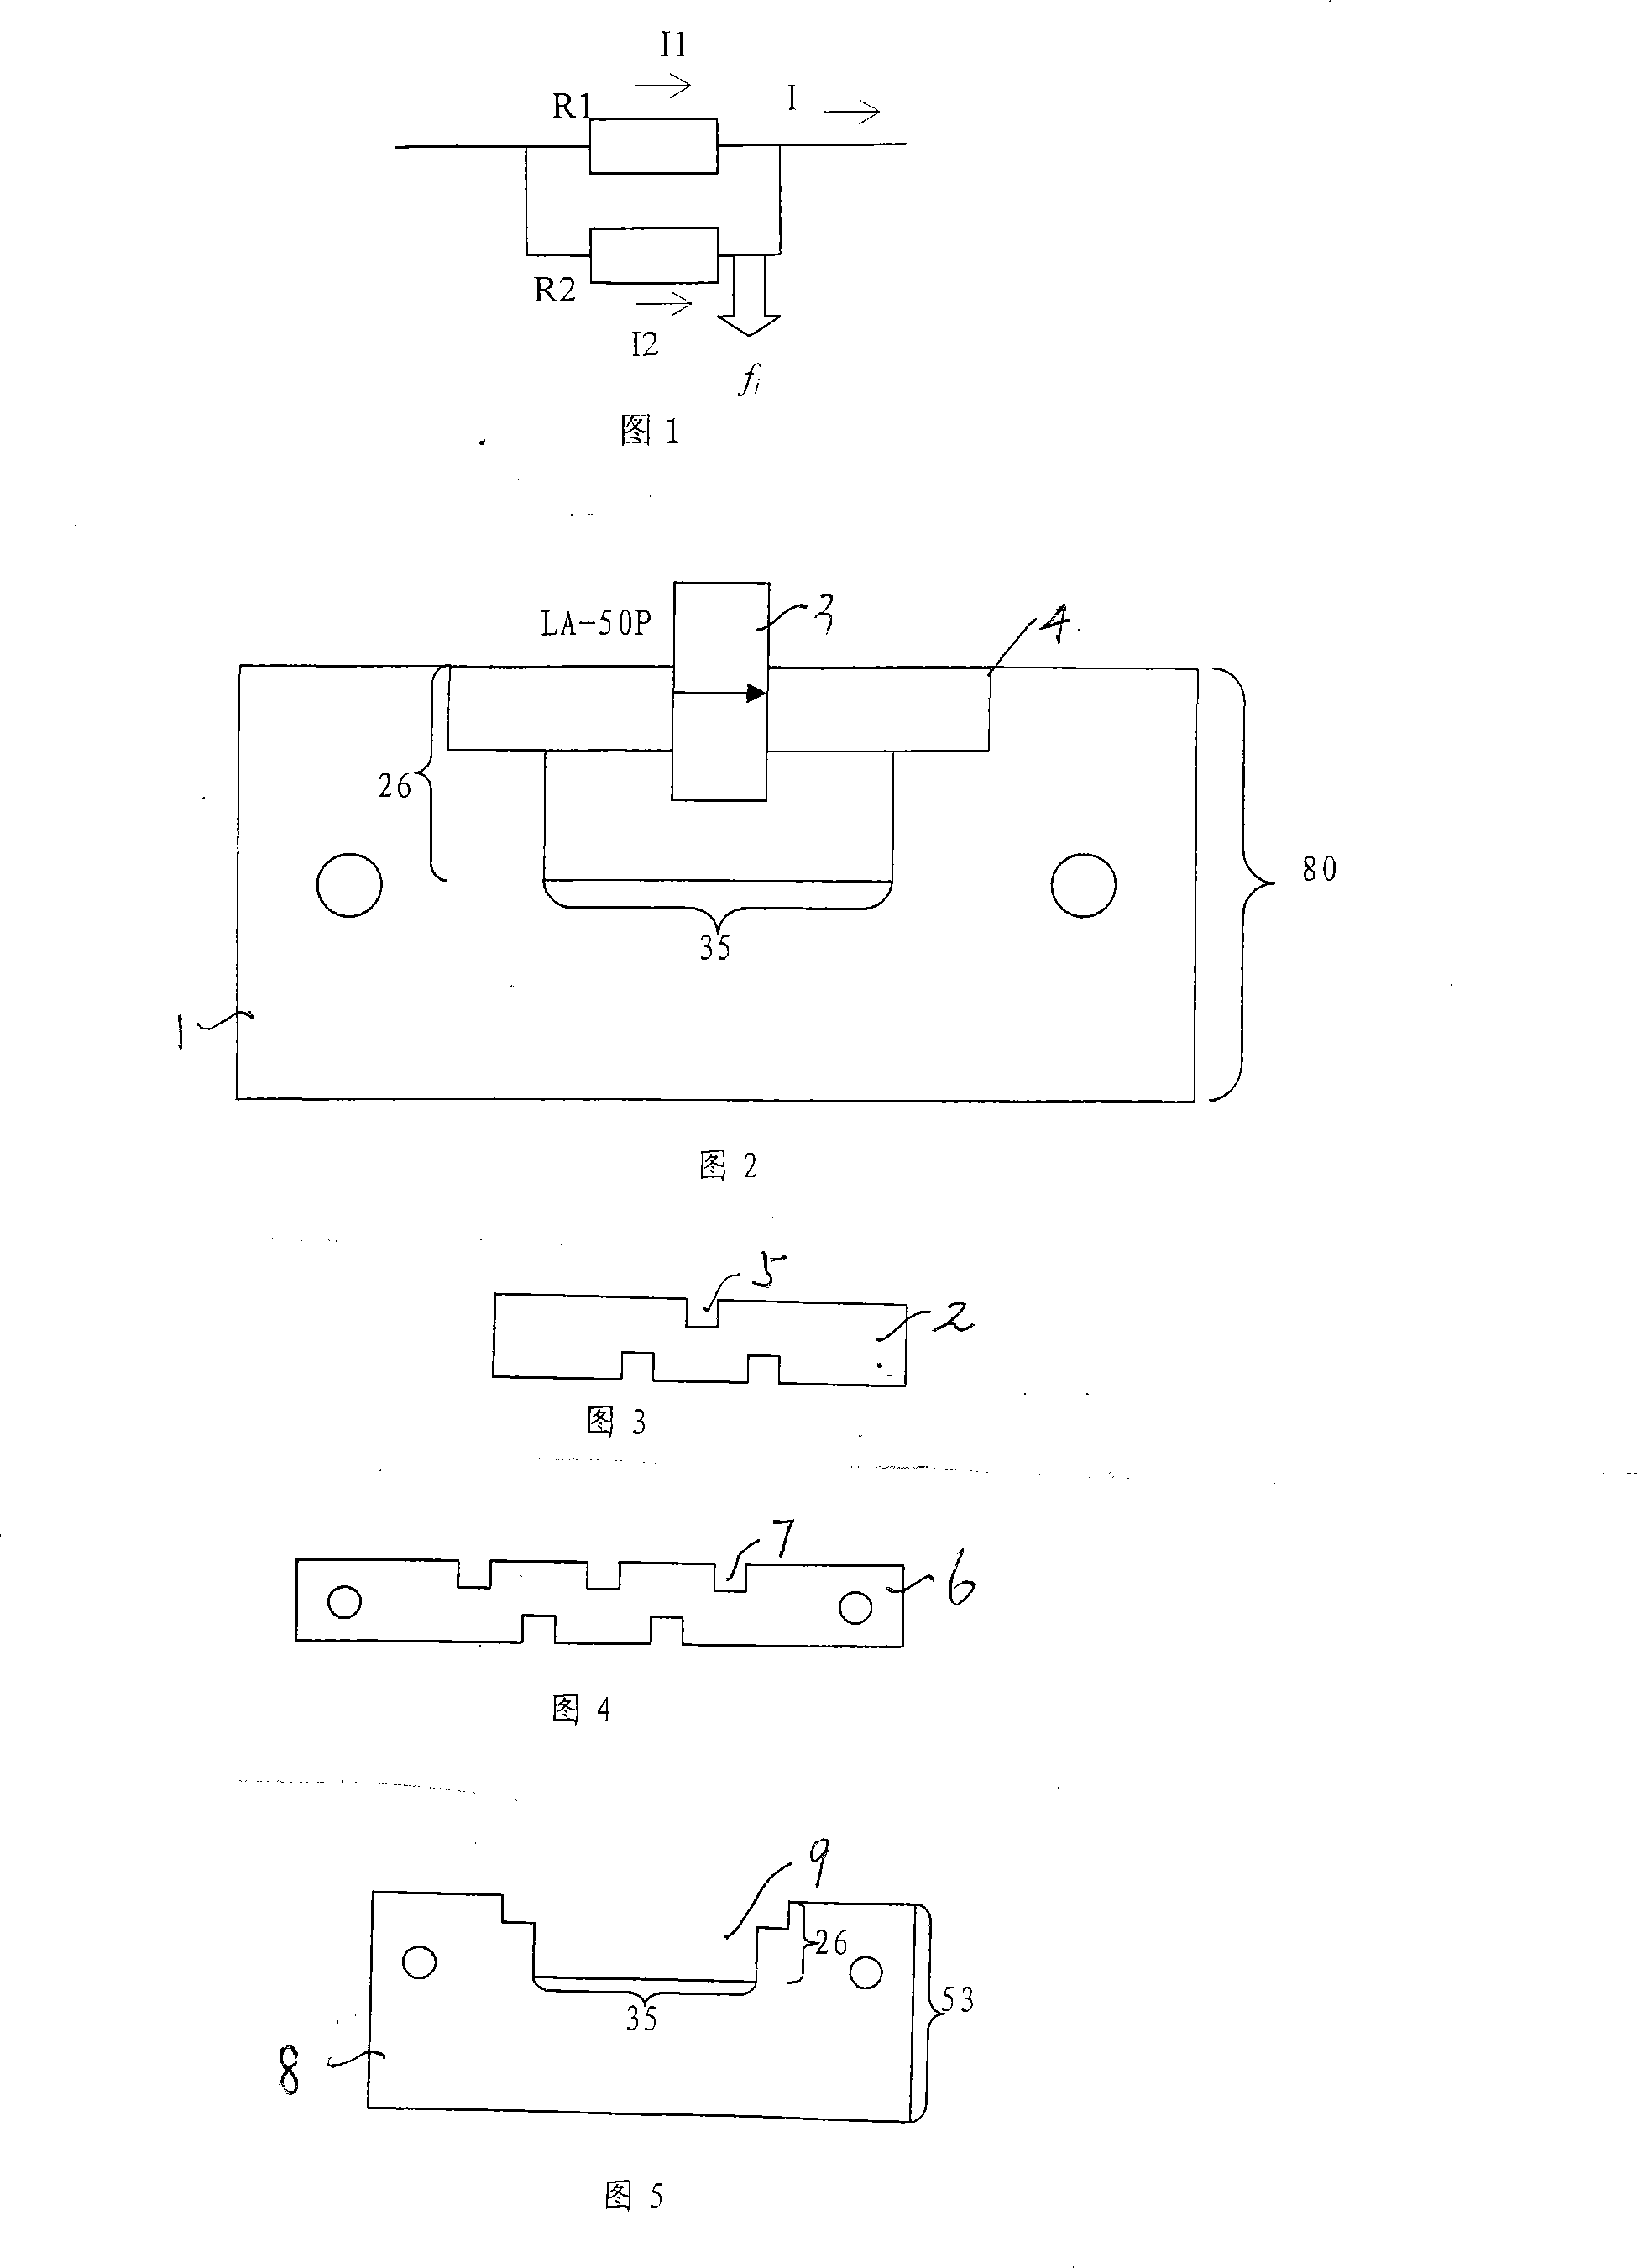 Feedback current sampling device for shunt erosion switch power